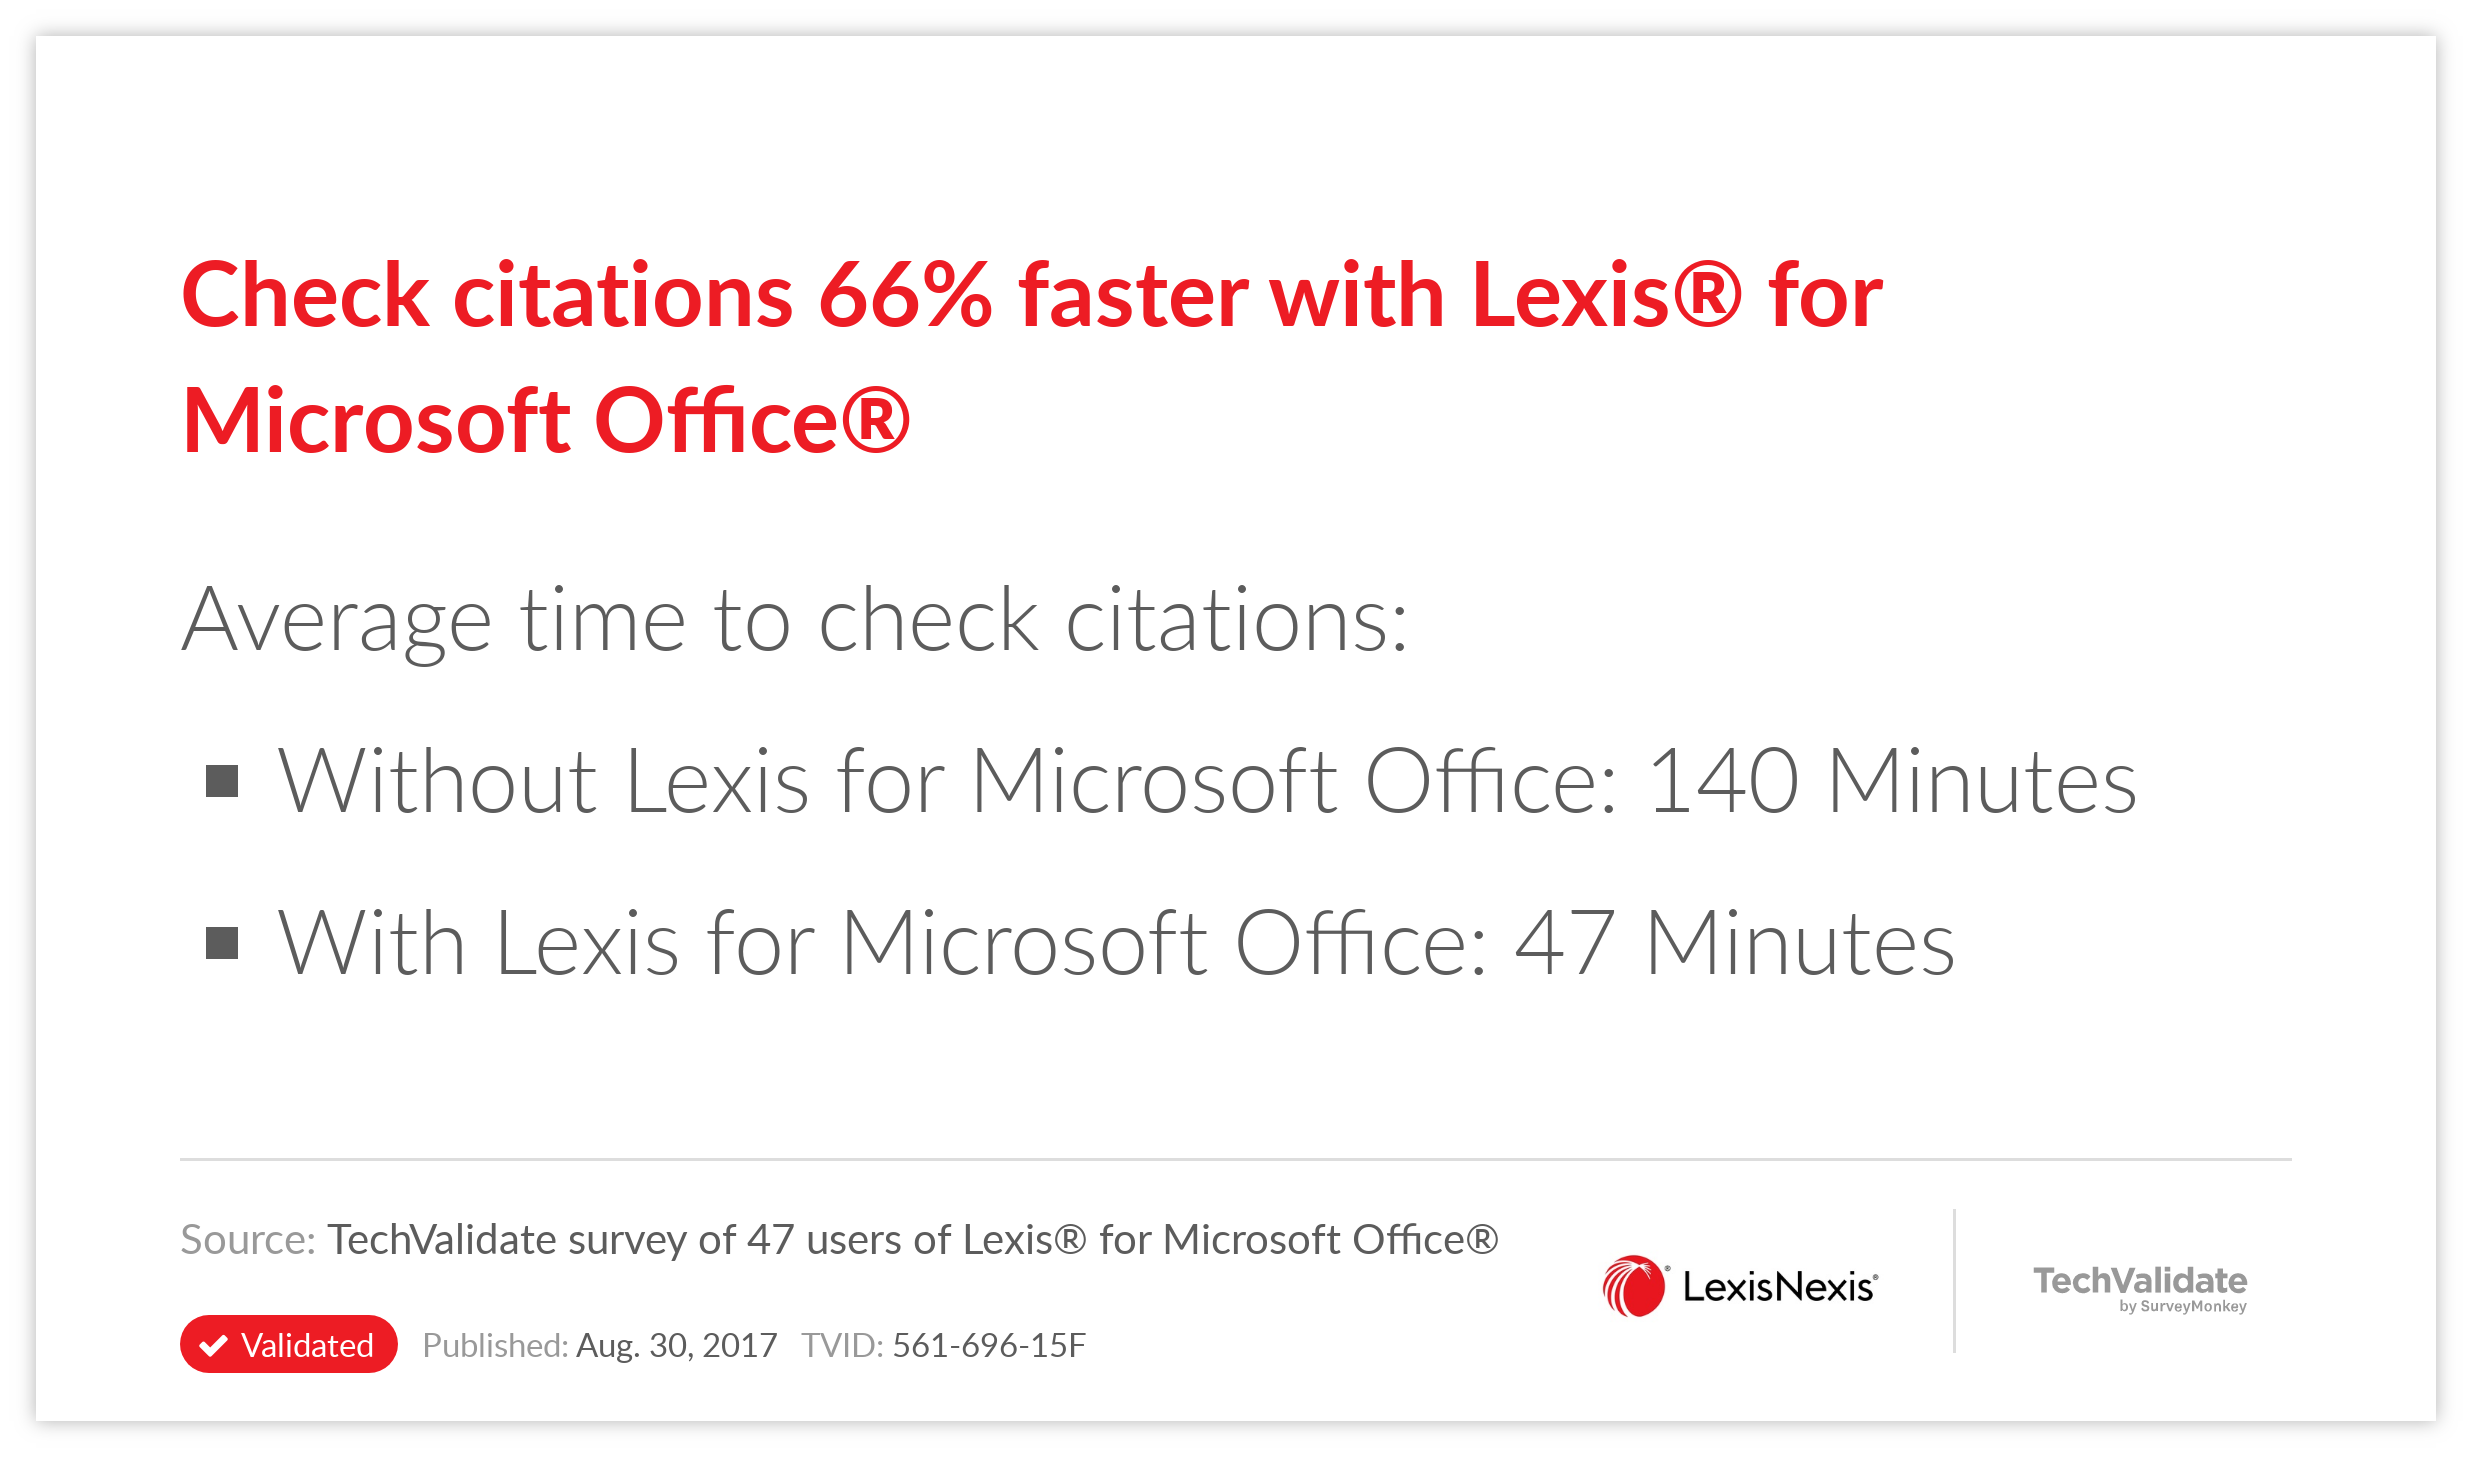 Check citations 66% faster with Lexis® for Microsoft Office®